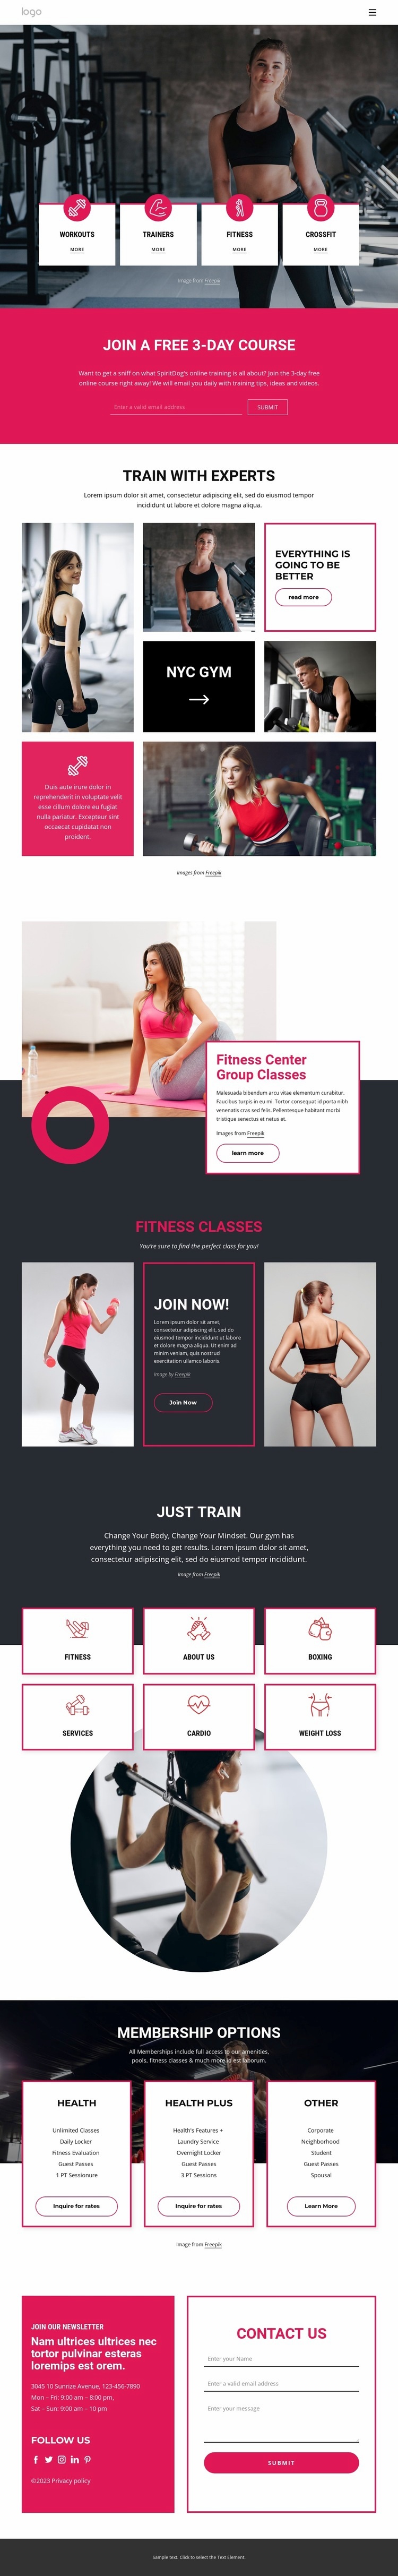 Join a Crossfit gym Homepage Design